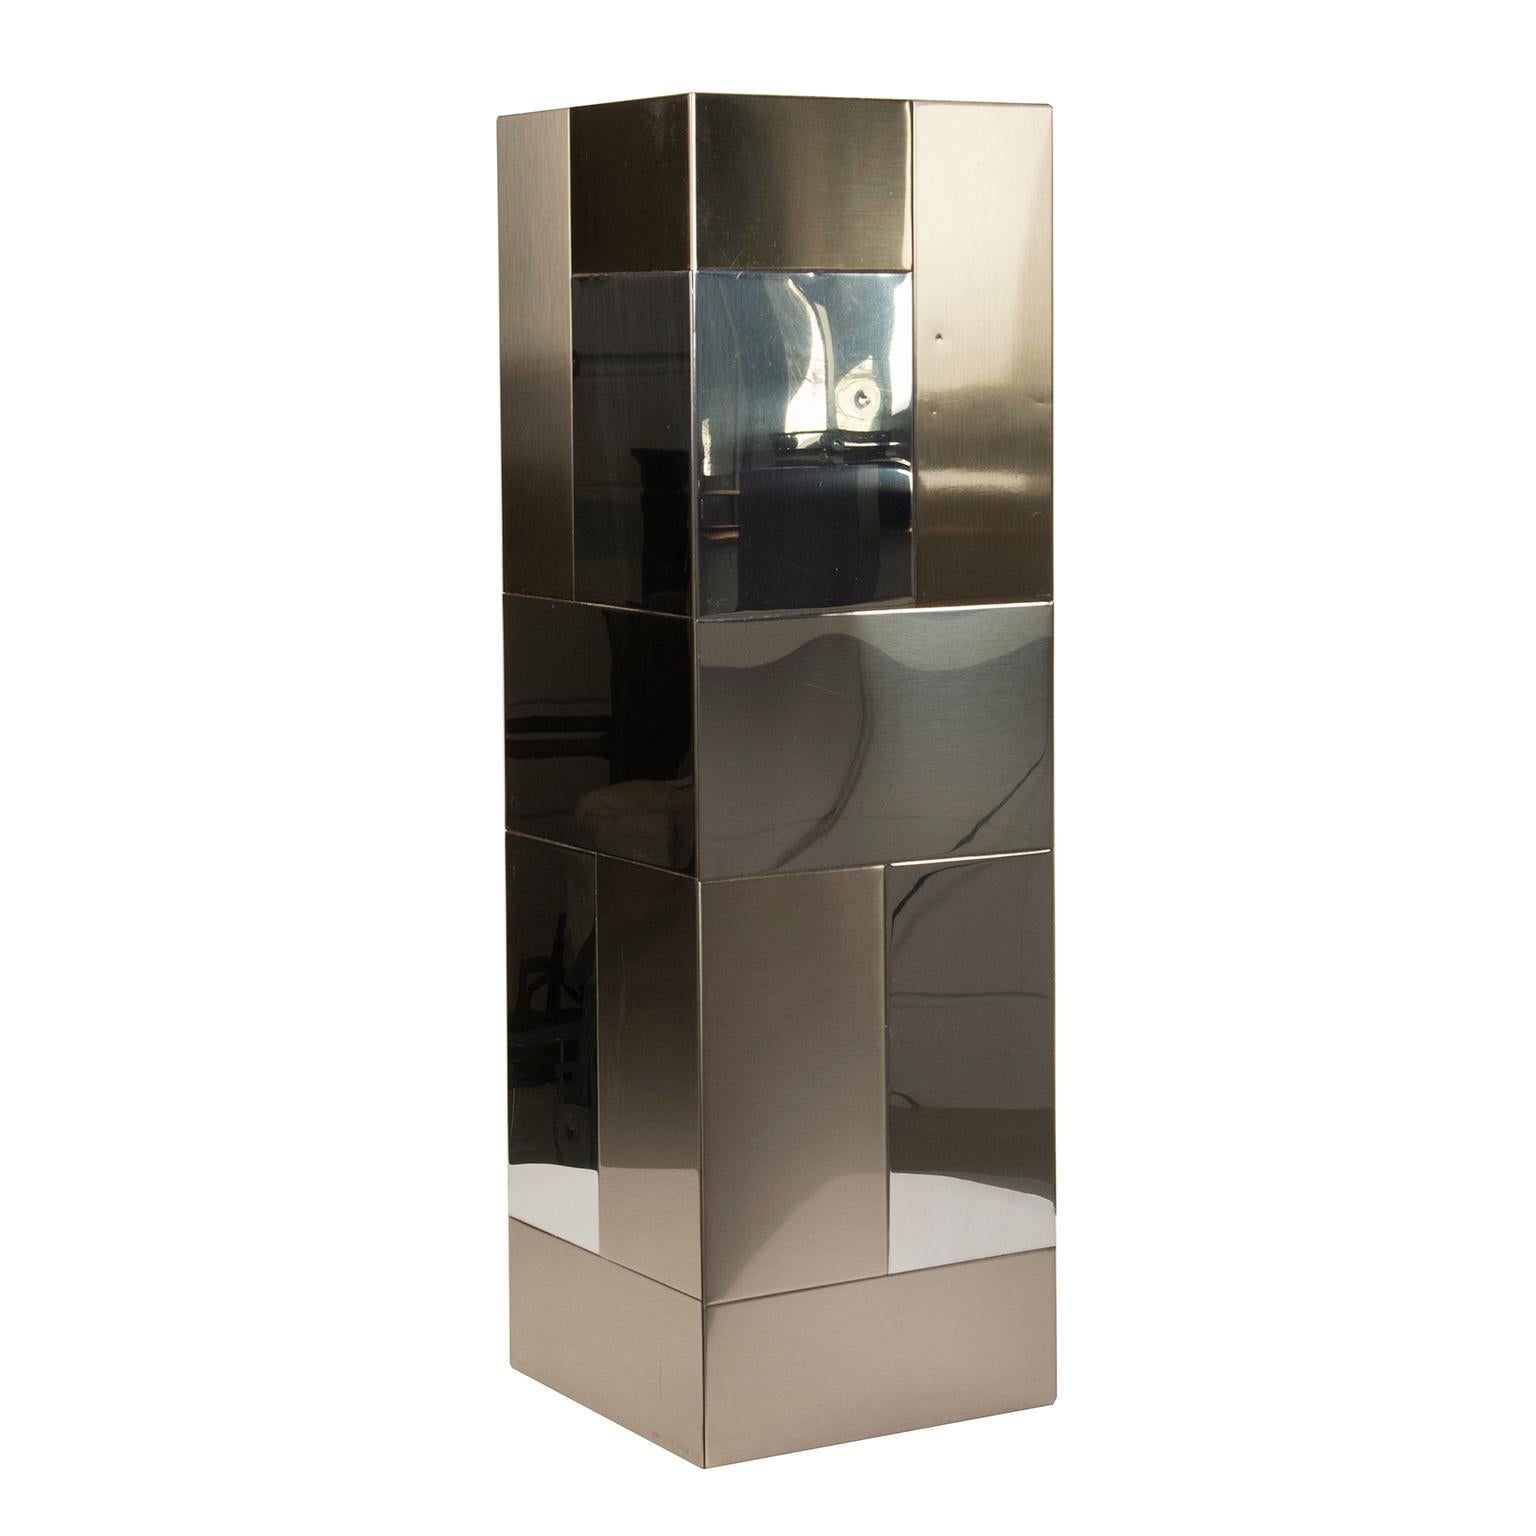 This 10”x10”x32” bench made wood pedestal is clad in bright and brushed stainless steel sections and is typical of Paul Evan’s “Cityscape” designs of the 1970’s.
It is highly decorative and functional and is great for displaying sculpture or as a